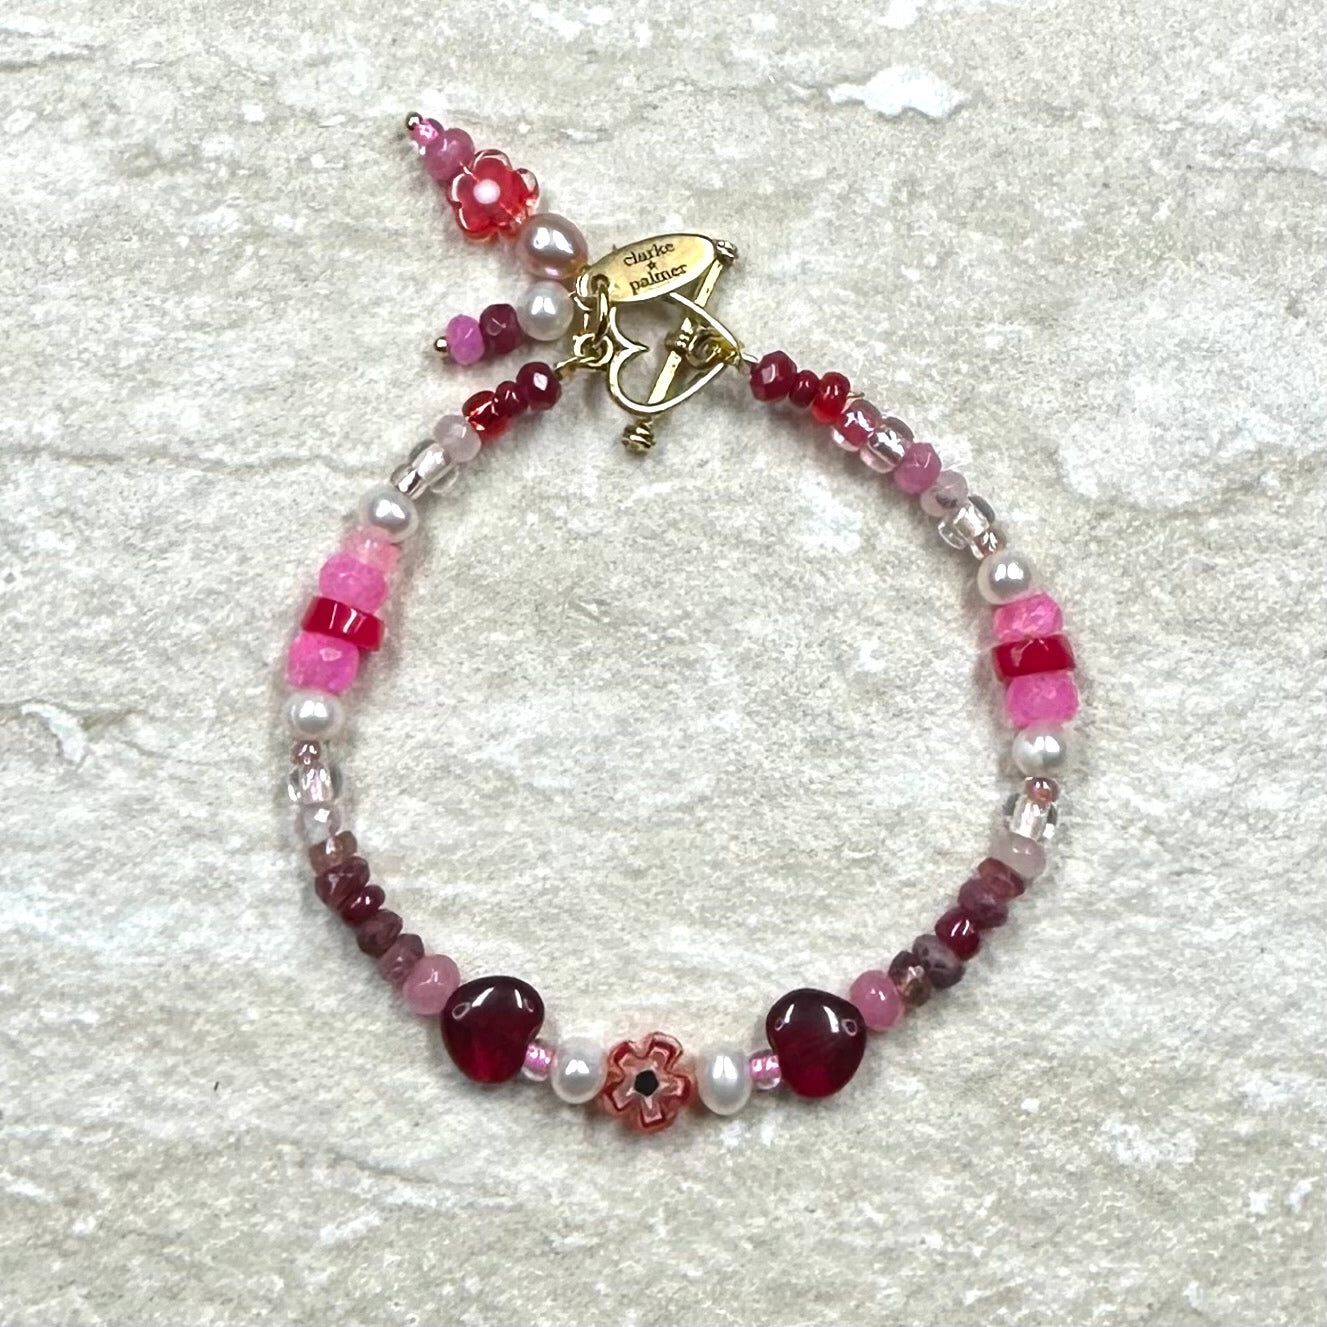 ‘Hearts and Flowers’ Love Gemstone and Pearl Bracelet